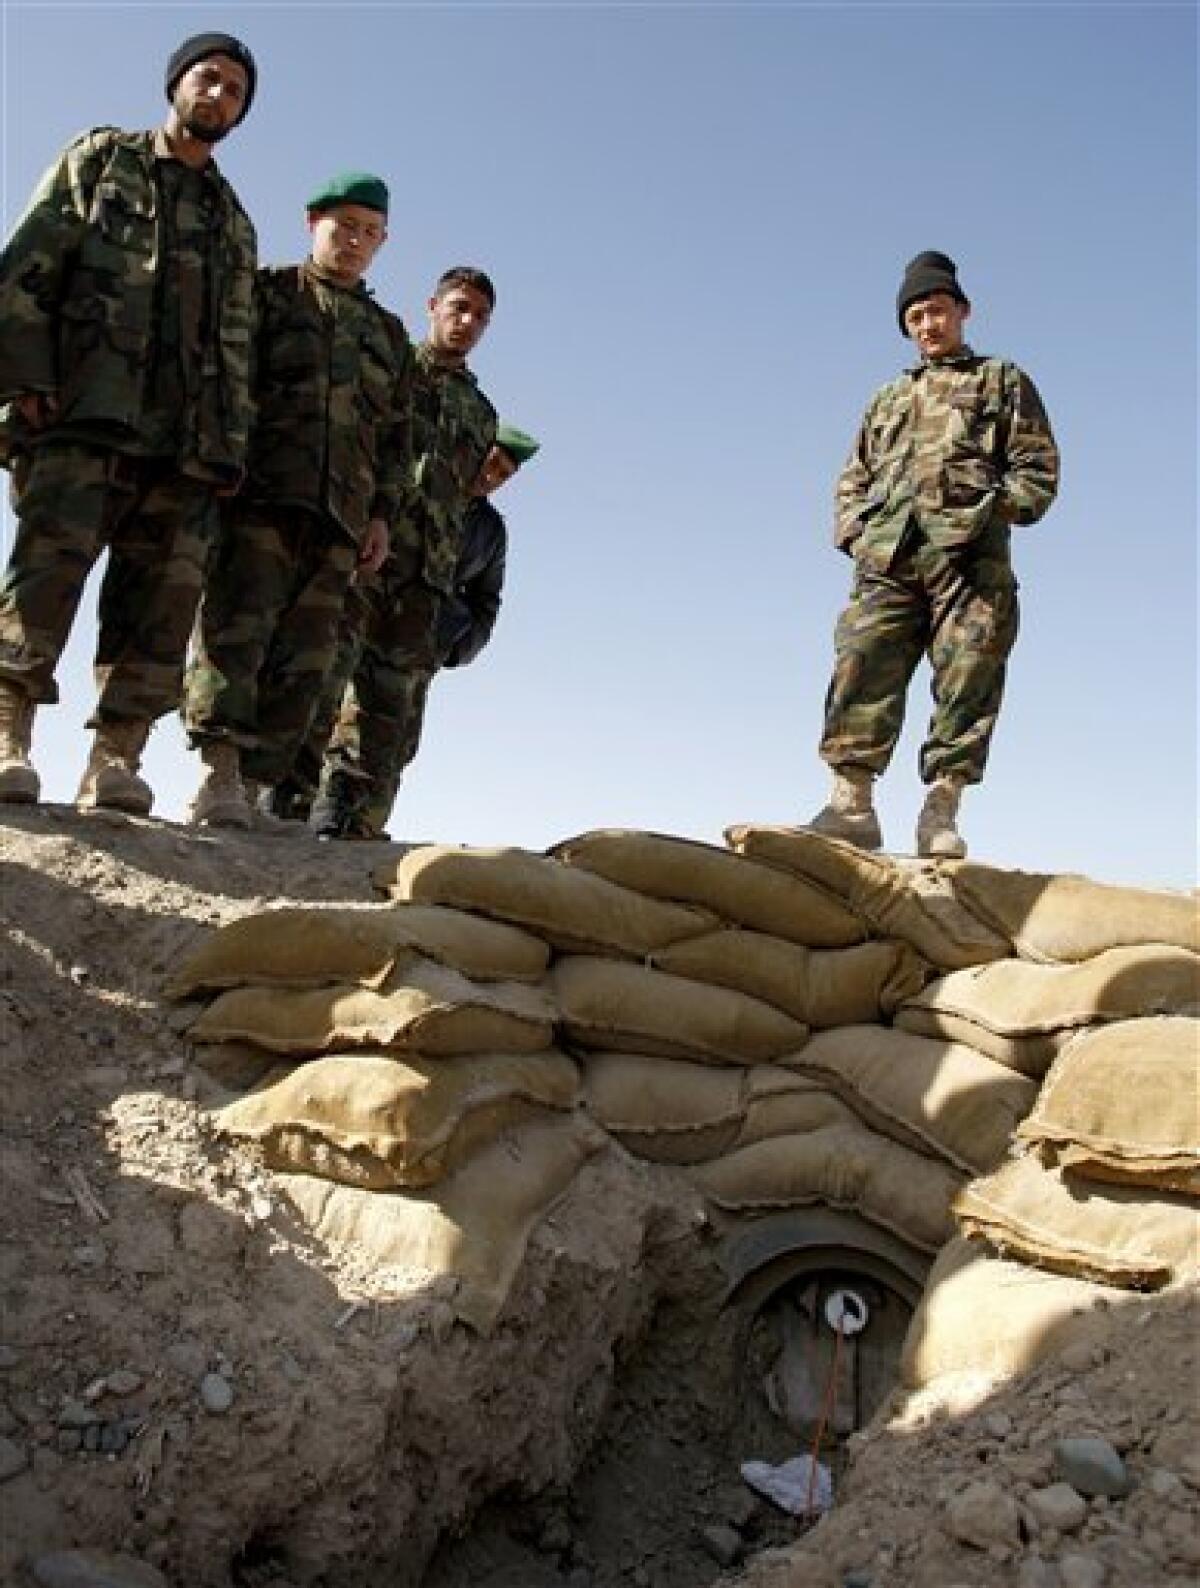 Afghan National Army soldiers look at the set up of an improvised explosive device (IED) during training at Camp Hero in Kandahar, southern Afghanistan Monday, Feb. 1, 2010. Those who specialize in clearing improvised explosive devices in Afghanistan are getting better at finding them before they go off, but it is a constantly evolving battle that exacts a high toll. (AP Photo/Kirsty Wigglesworth)